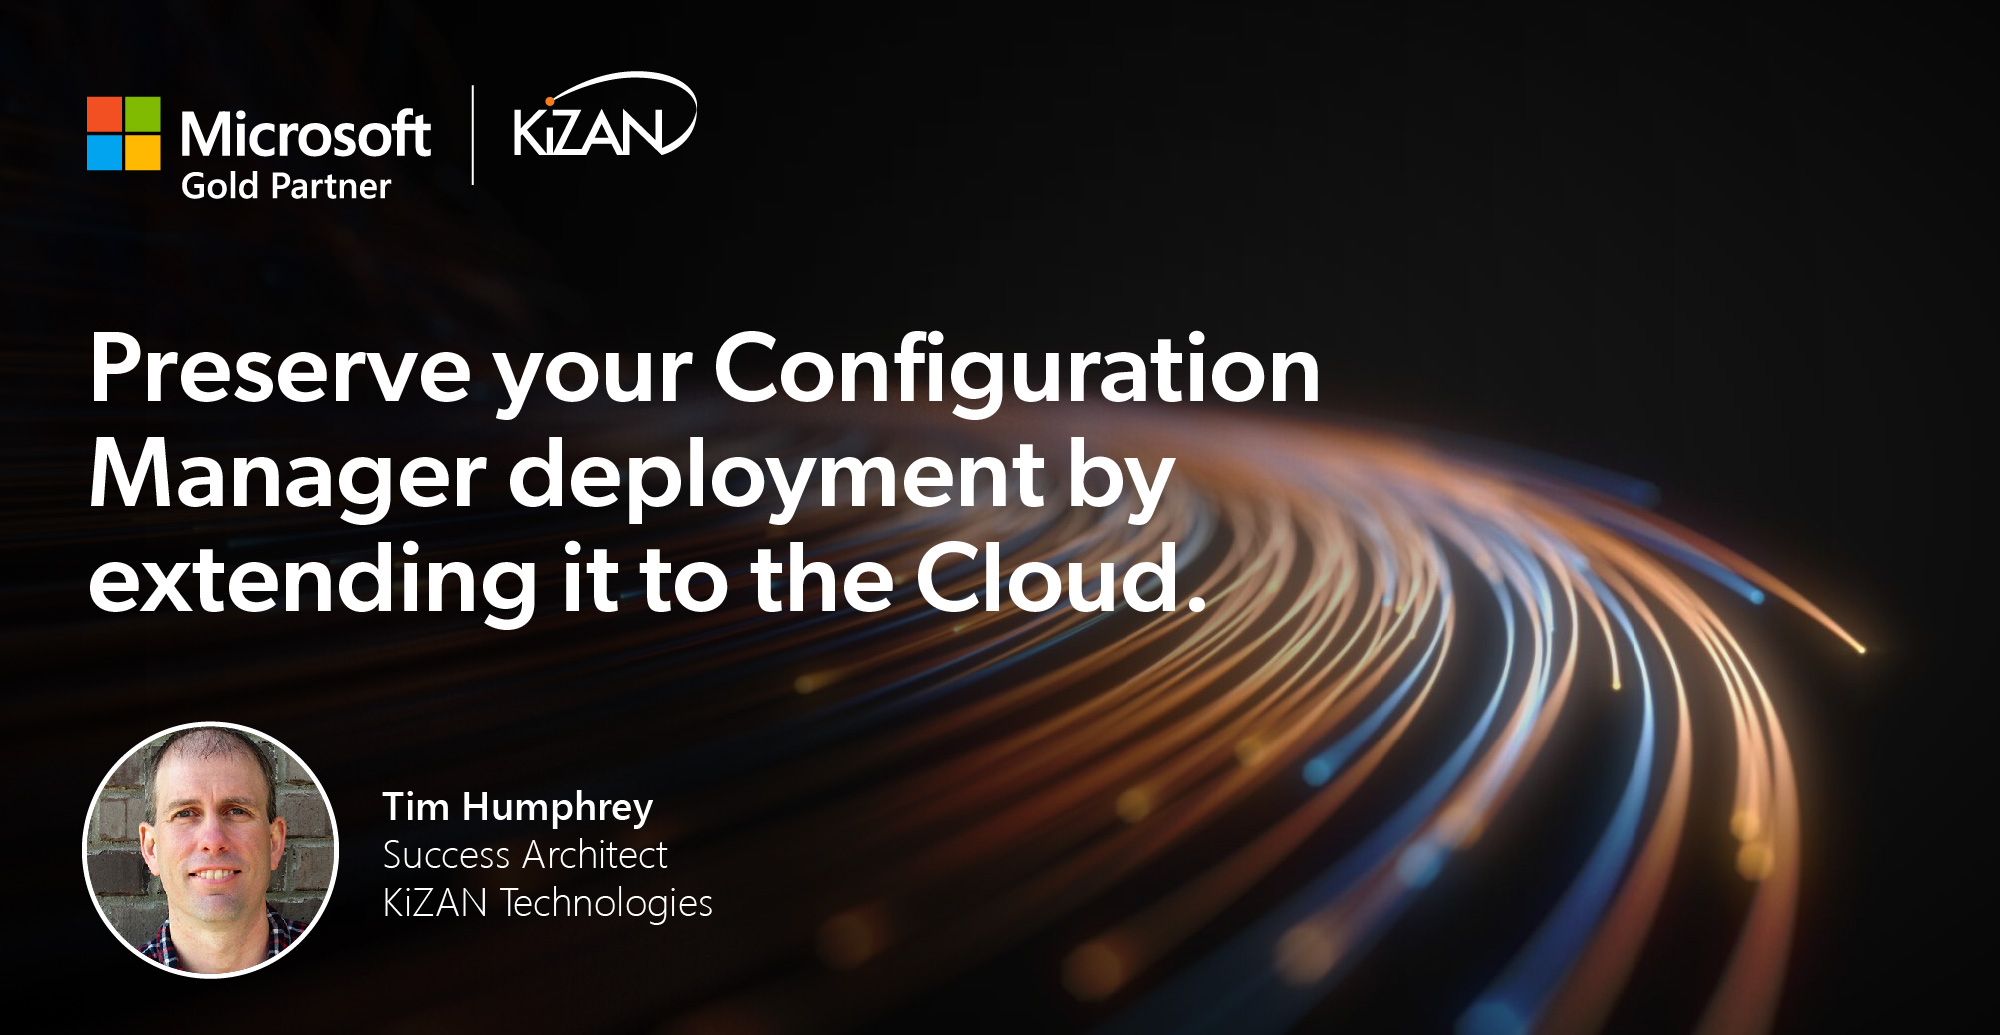 Preserve your Configuration Manager deployment by extending it to the Cloud